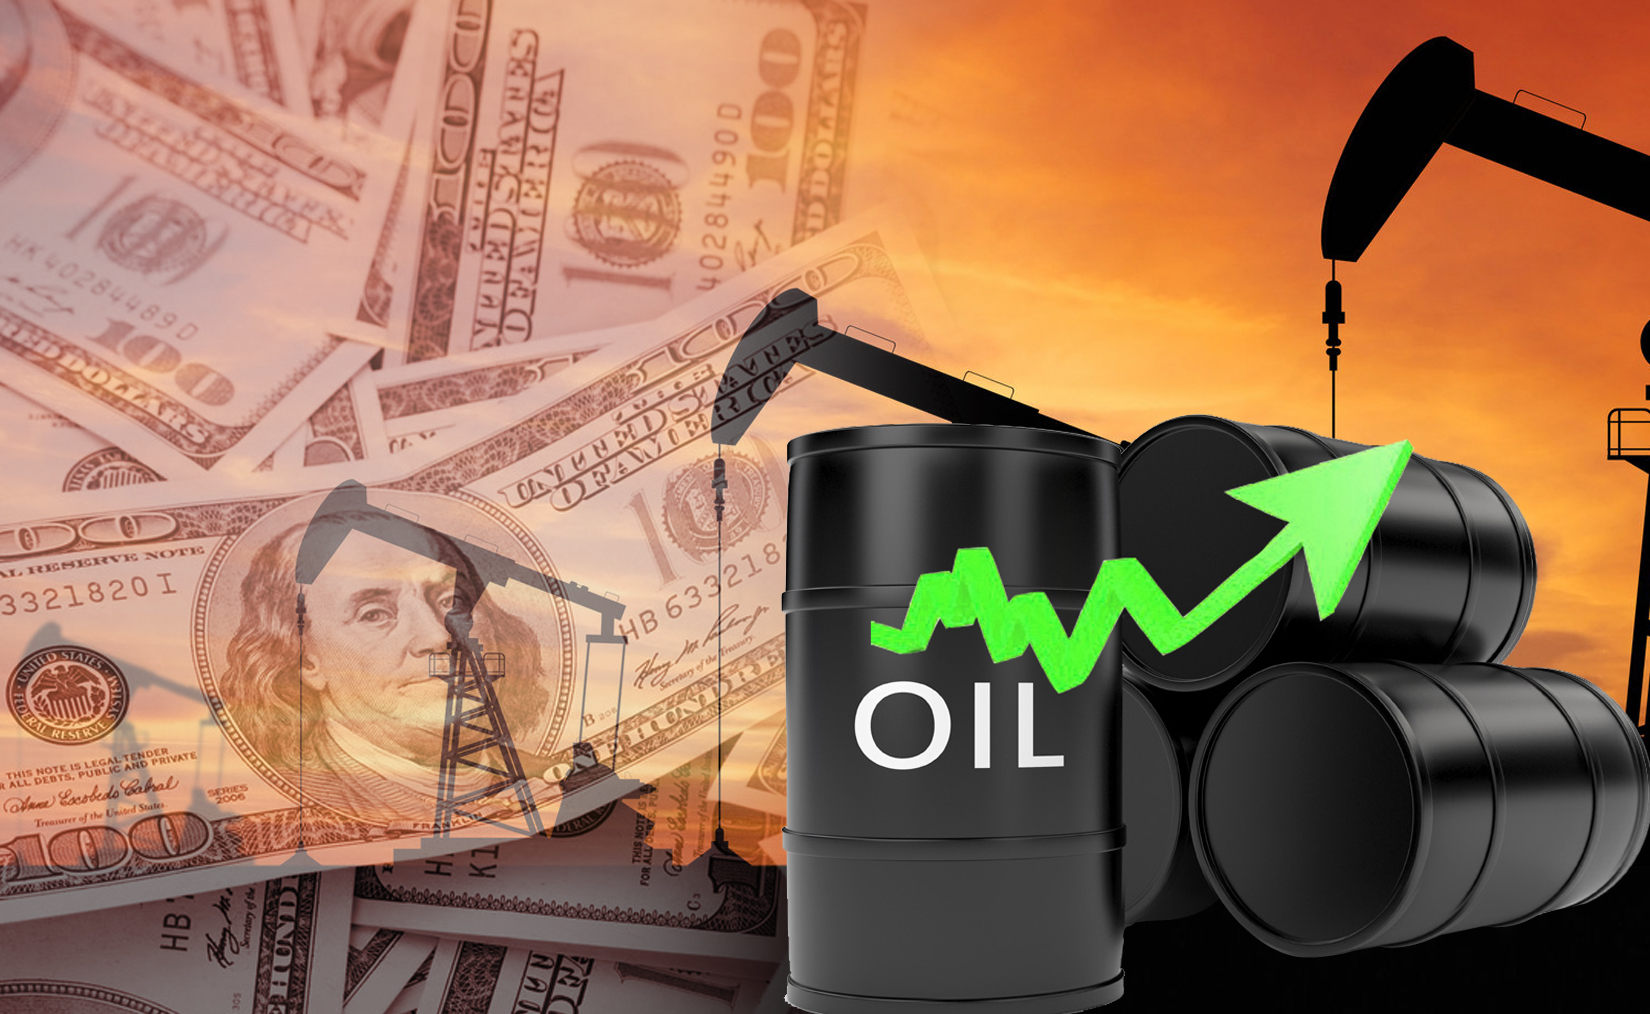 Kuwaiti oil price up 34 cents to stand at USD 66.42 per barrel                                                                                                                                                                                            